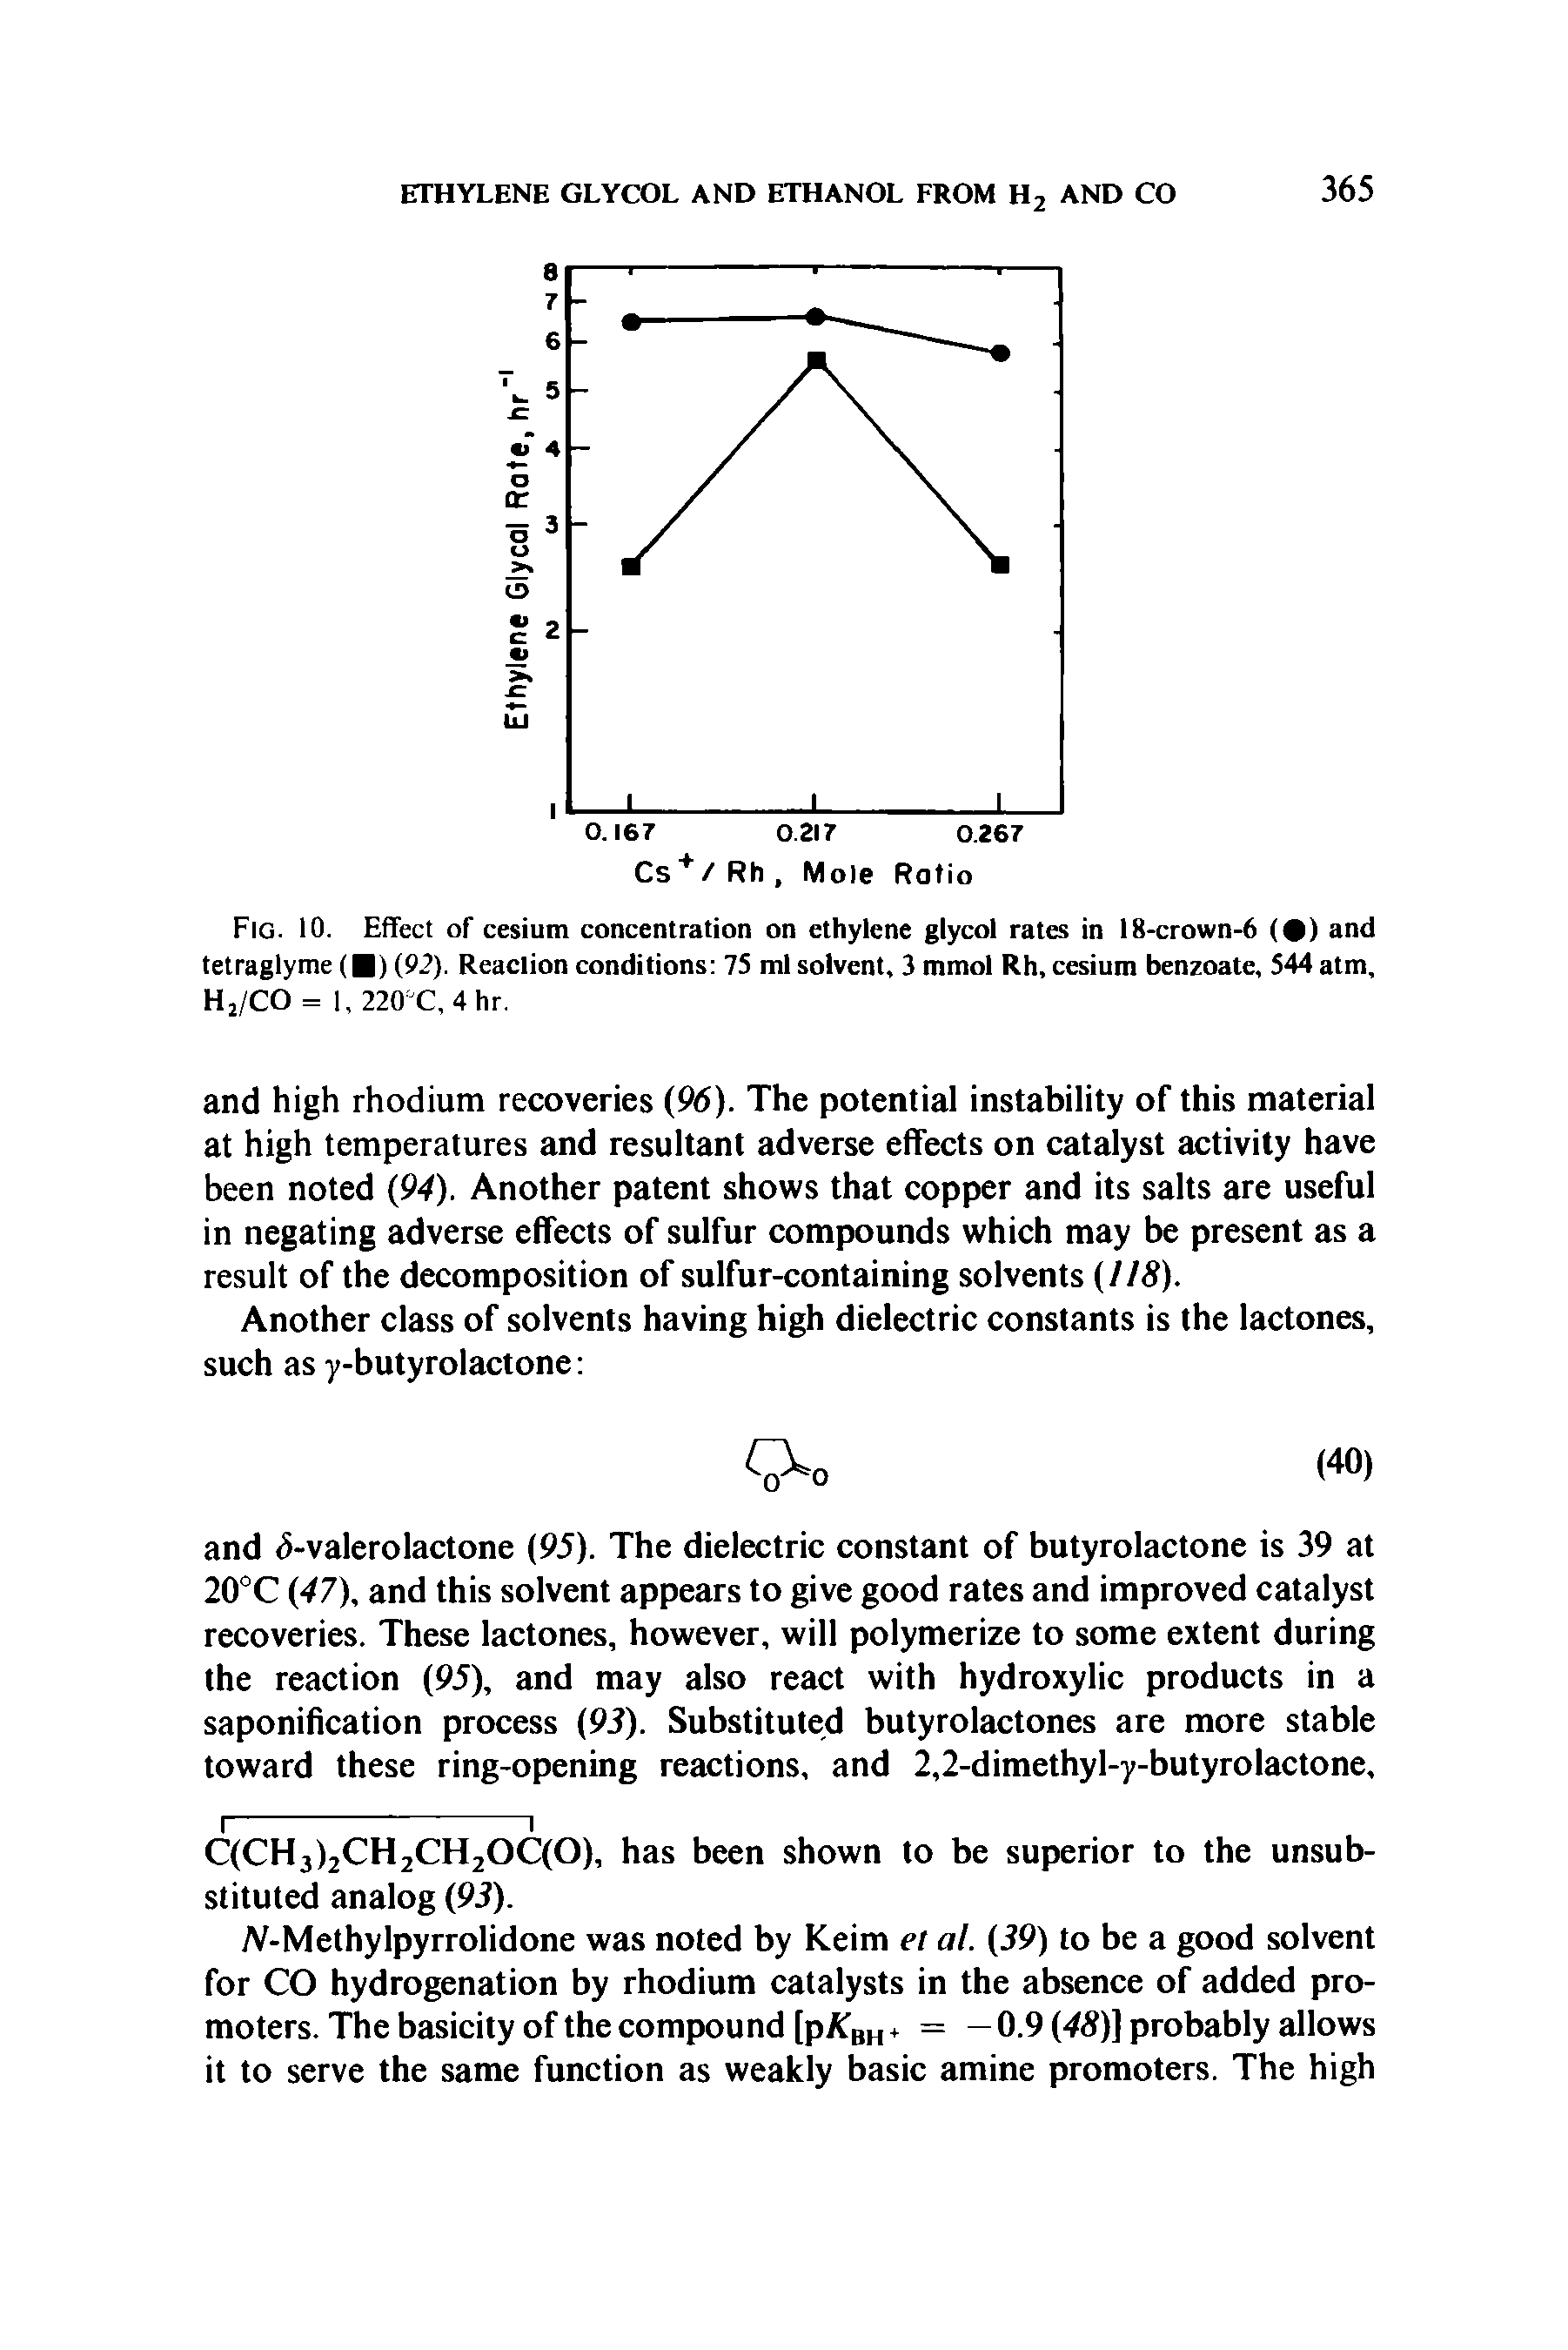 Fig. 10. Effect of cesium concentration on ethylene glycol rates in 8-crown-6 ( ) and tetraglyme ( ) (92). Reaction conditions 75 ml solvent, 3 mmol Rh, cesium benzoate, 544 atm, Hj/CO = 1, 220°C, 4 hr.